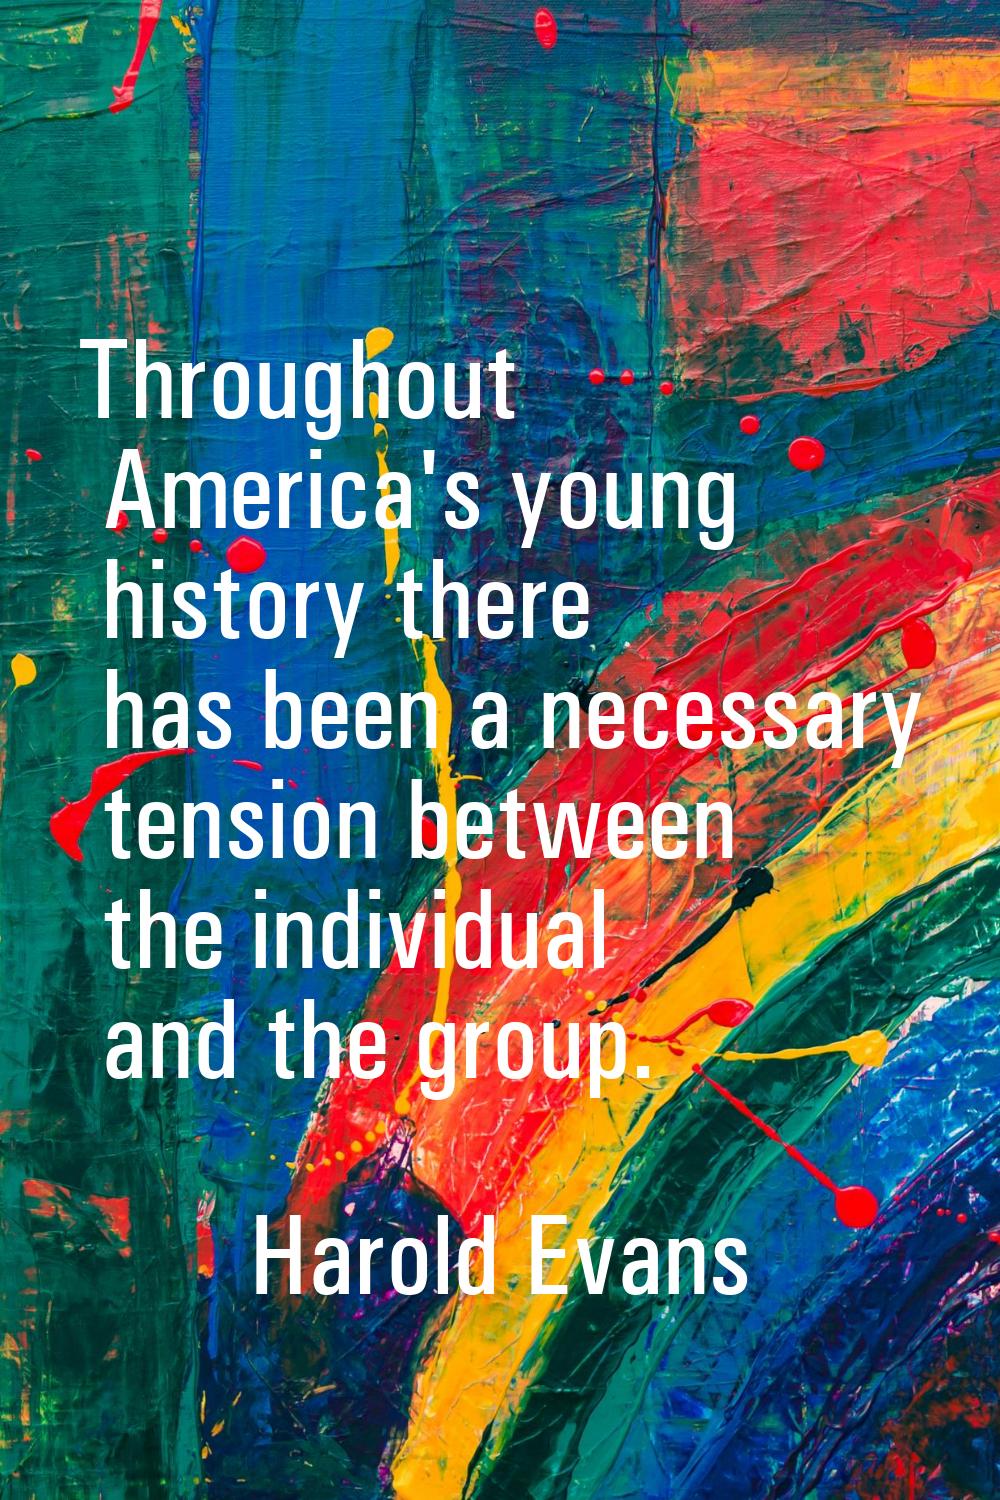 Throughout America's young history there has been a necessary tension between the individual and th